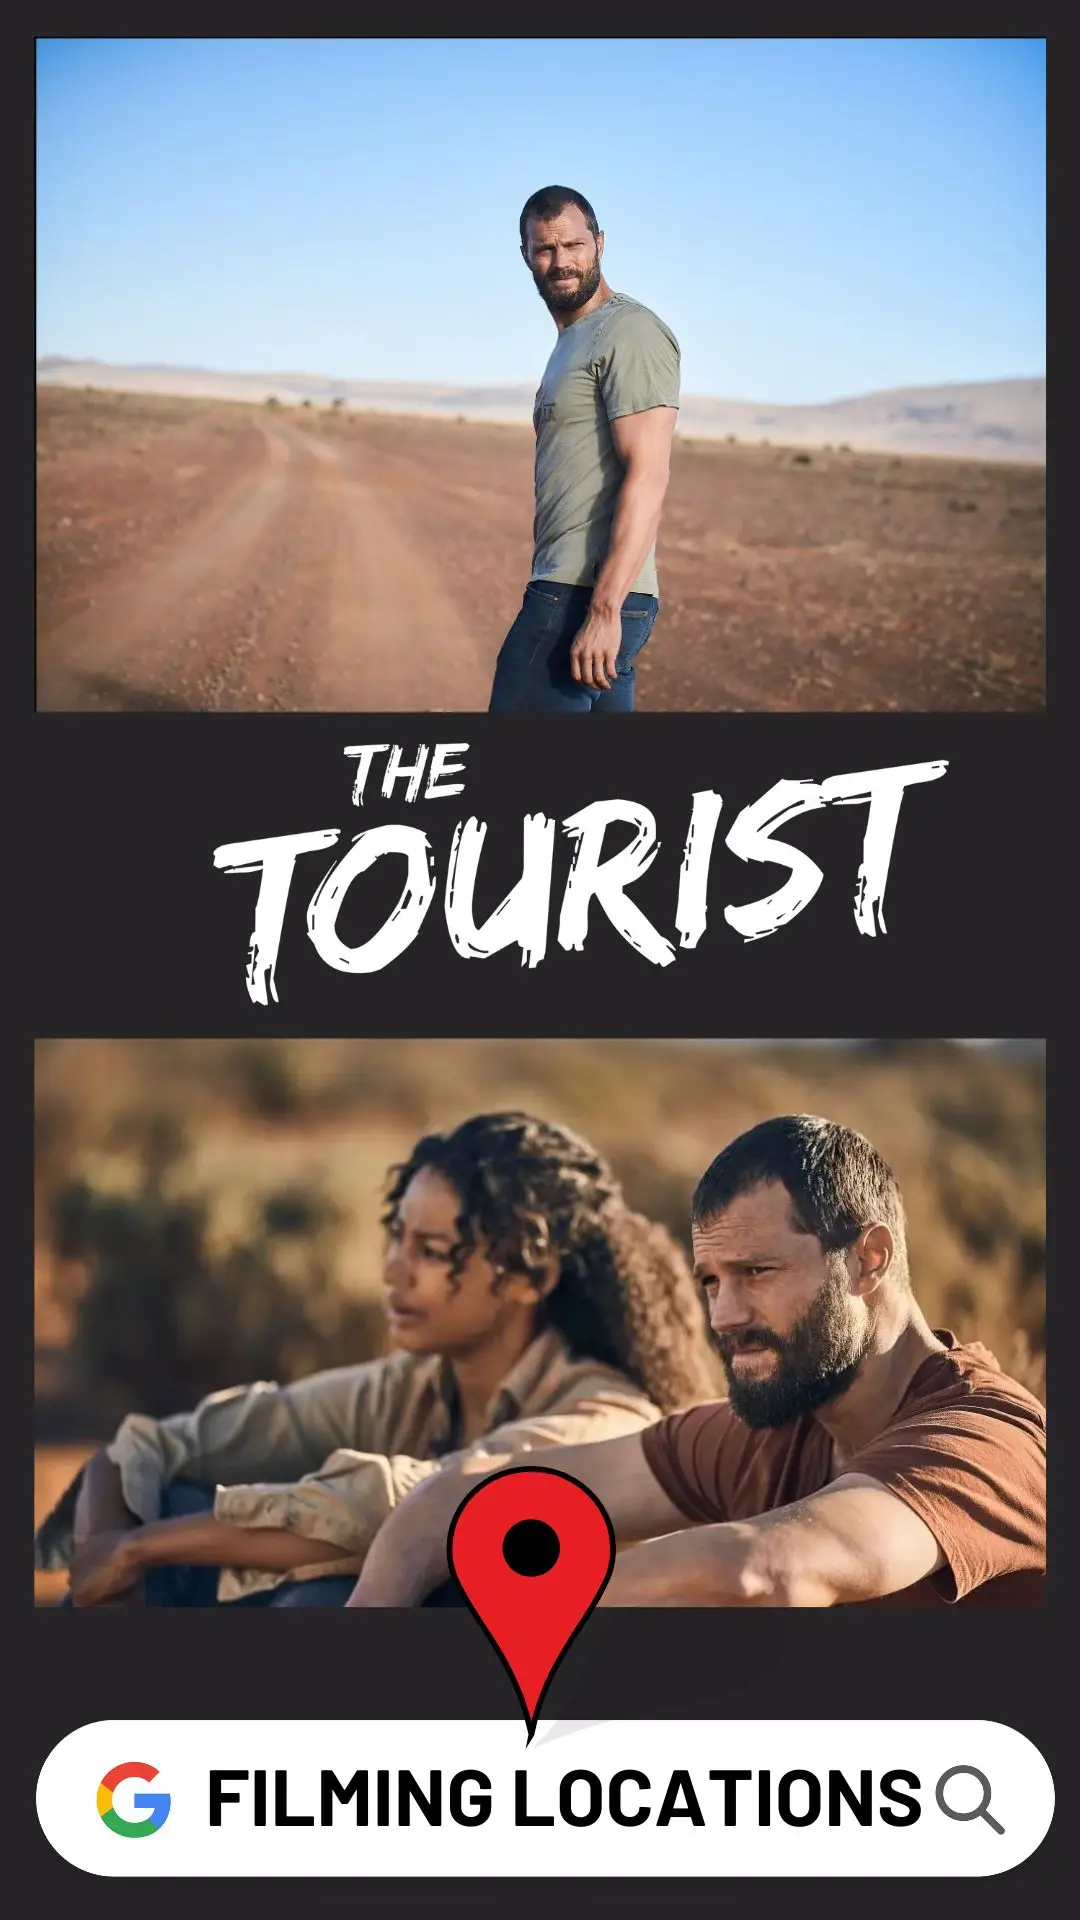 The Tourist Filming Locations